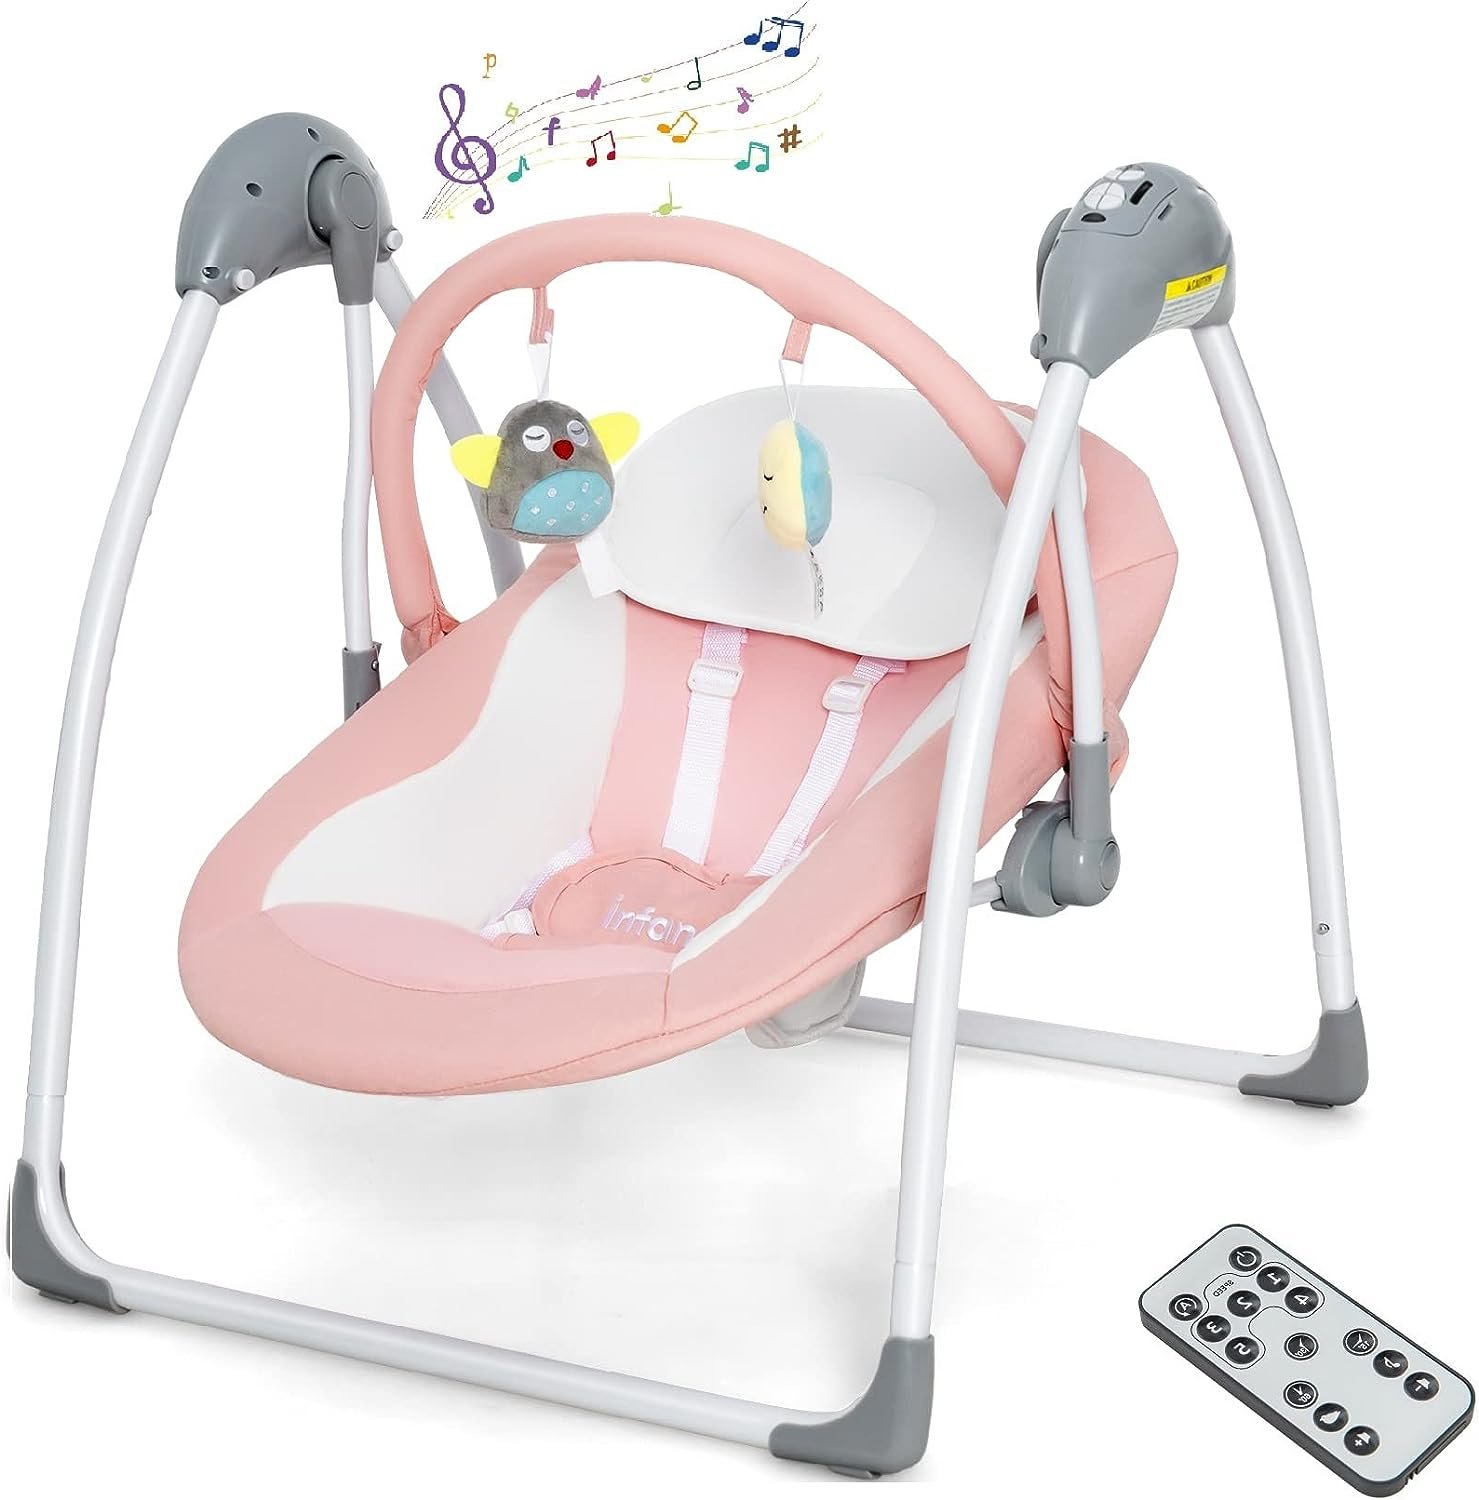 INFANS Baby Swing for Infants, Compact Portable Baby Electric Rocker for Newborn with 5 Speed Natural Sway Music Timing 2 Toys Remote Control, Easy Fold, 0-6 Months Boy Girl (Pink)